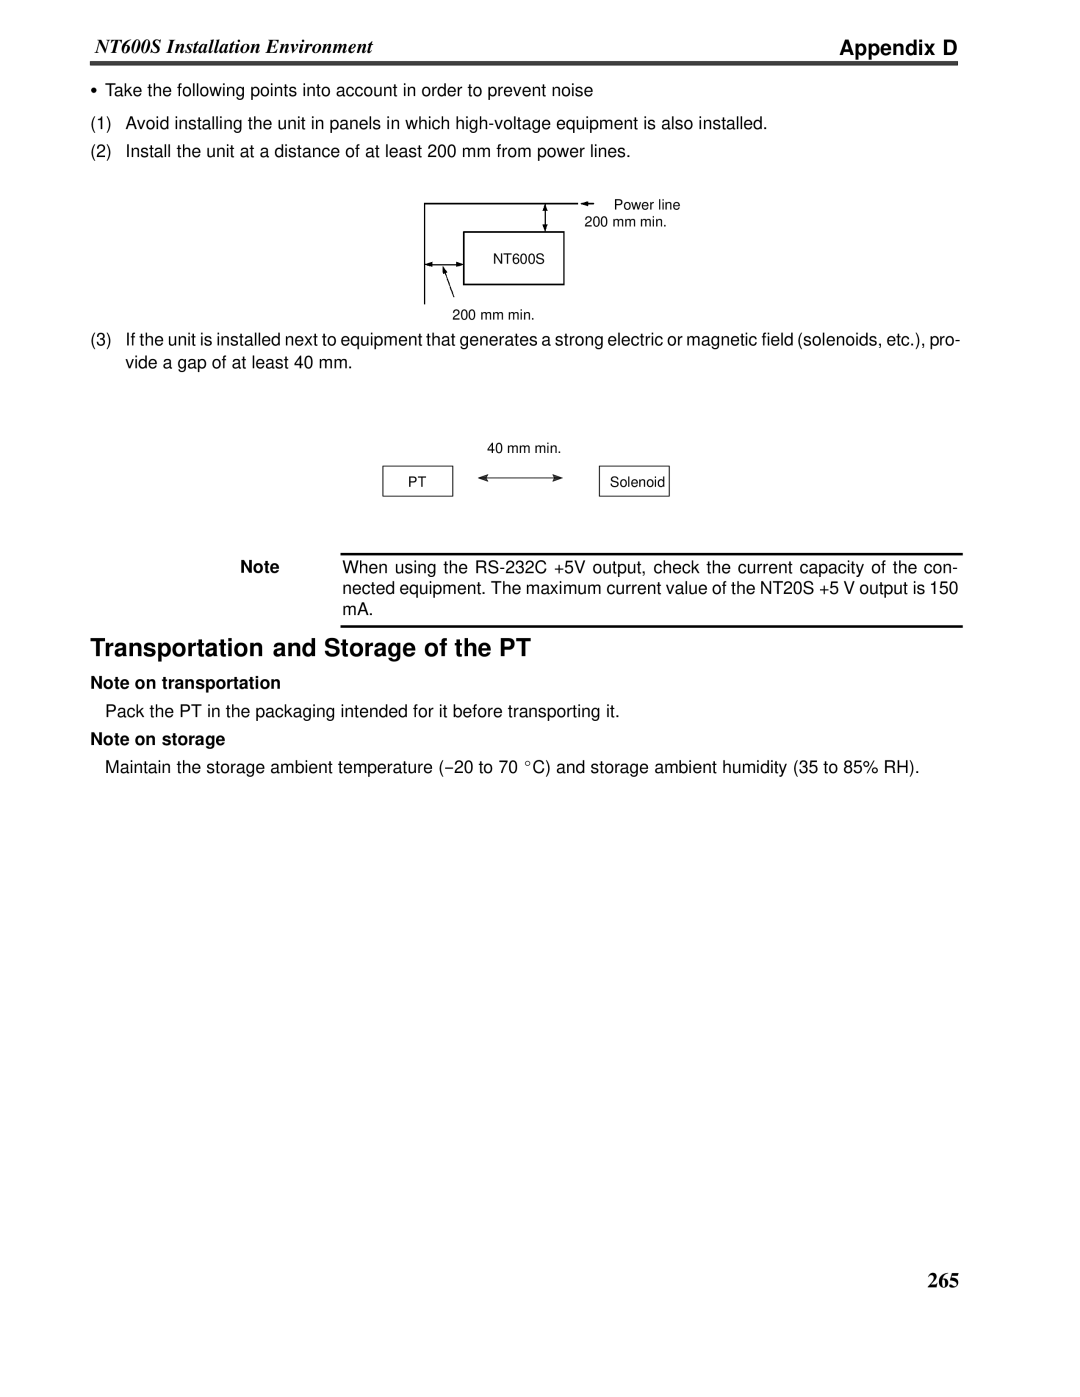 Omron V022-E3-1 operation manual Transportation and Storage of the PT, Appendix D, Note on transportation, Note on storage 